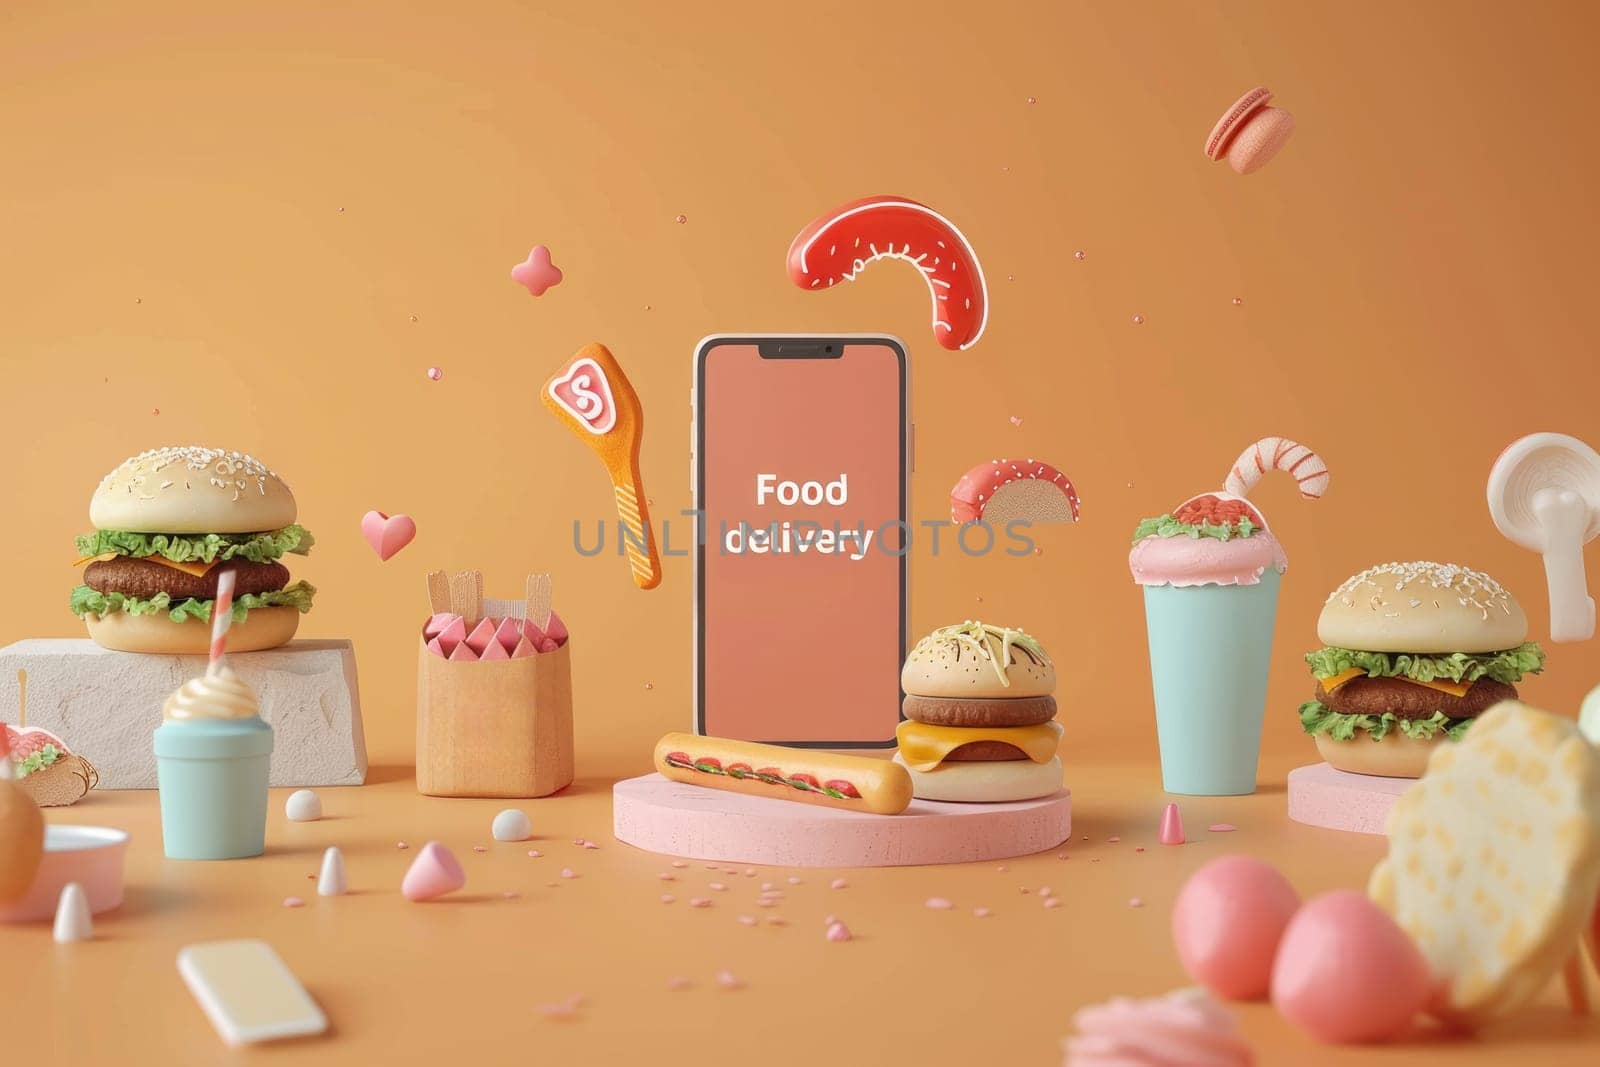 A food delivery app is shown on a phone with a variety of food items such as ham by golfmerrymaker